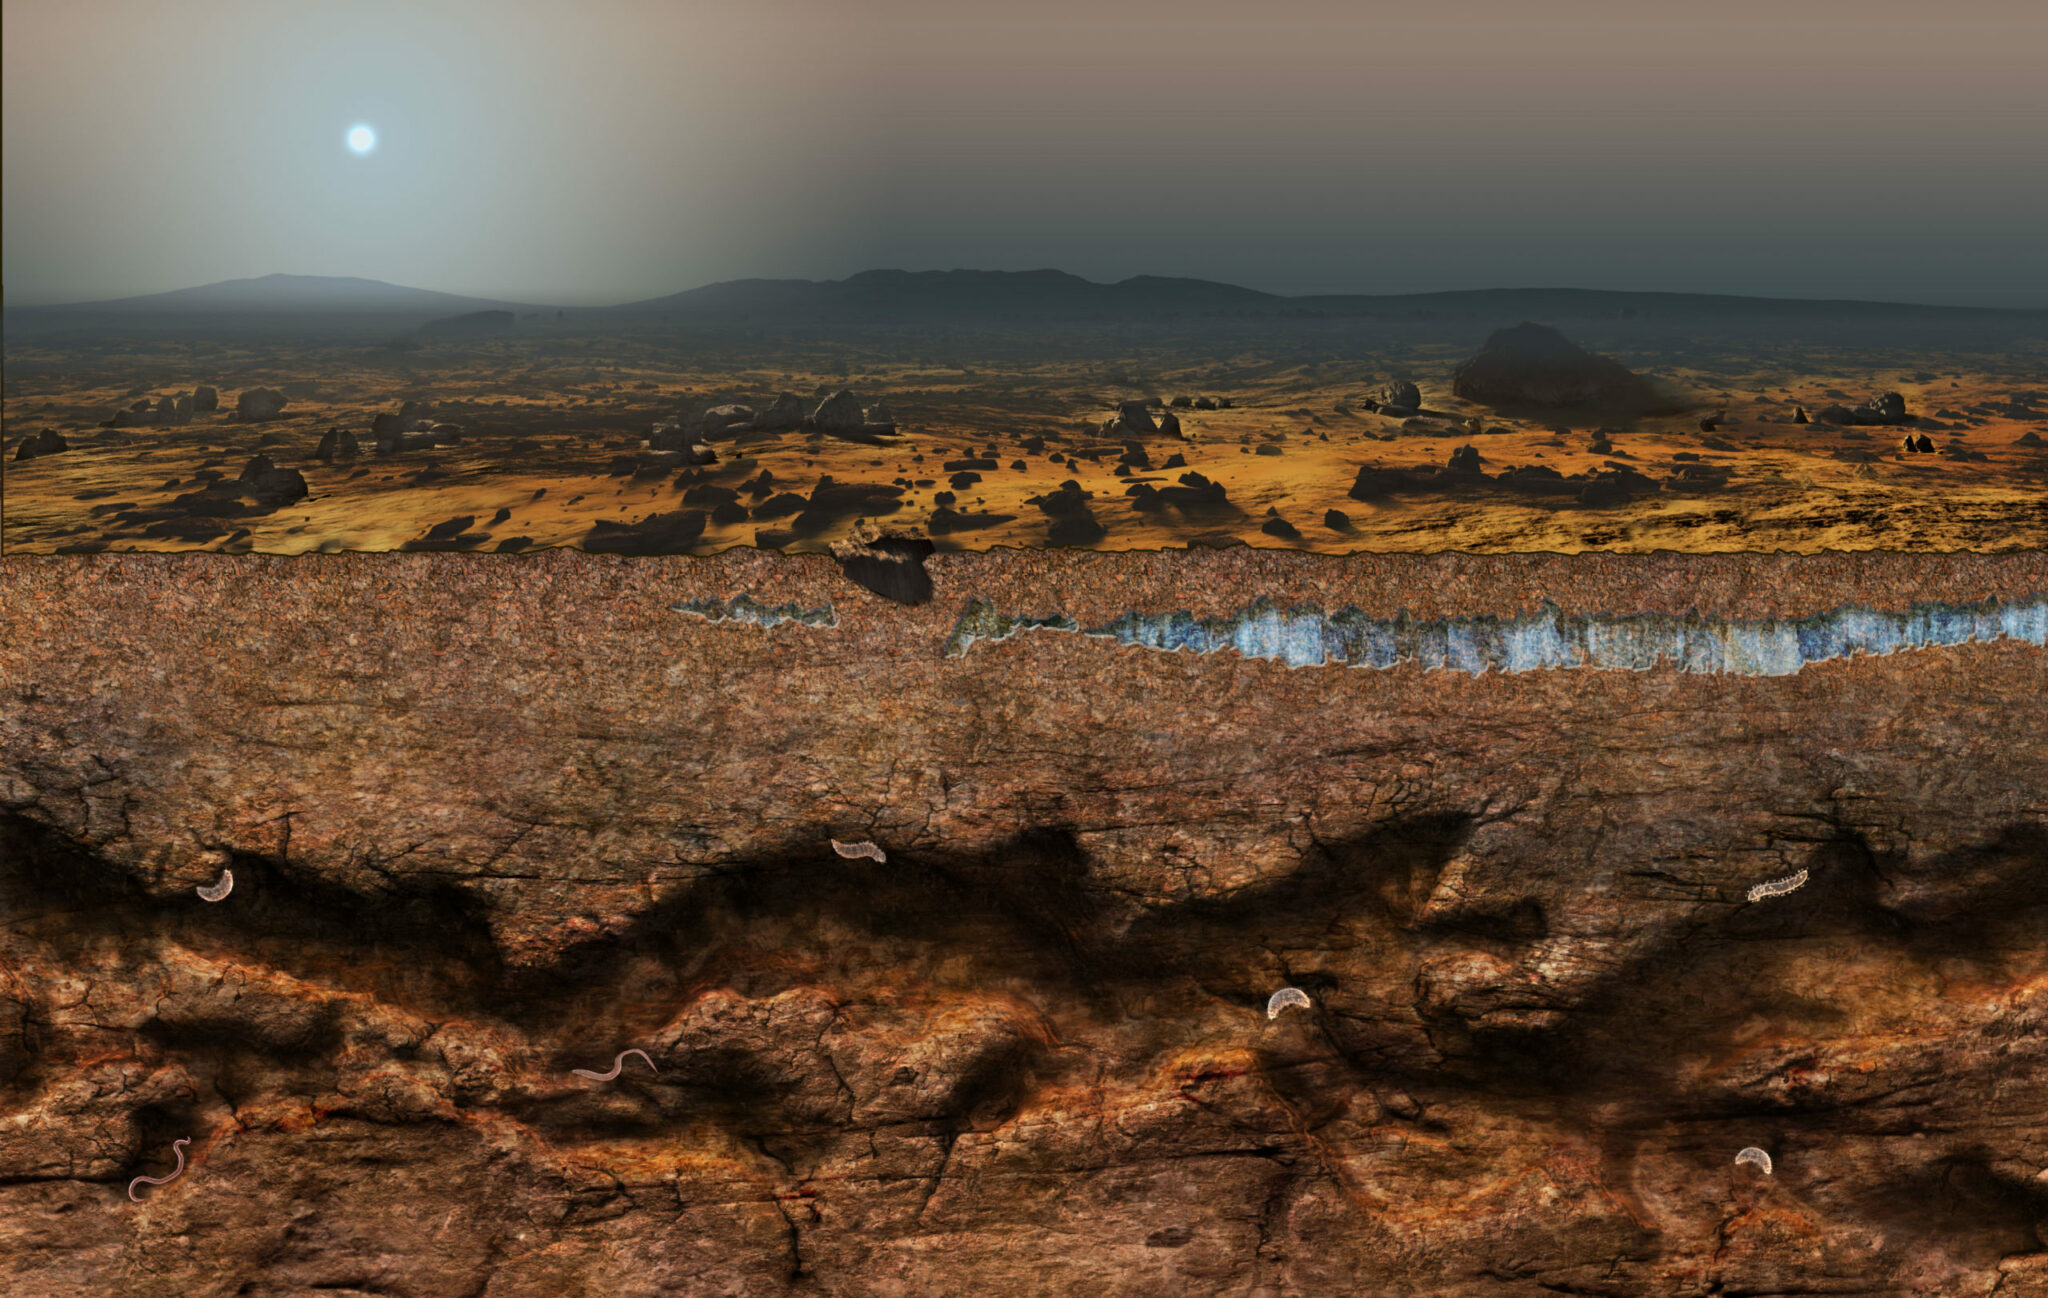 Martian Landscape showing potential extremophile life underground, based on scientific research illustrated by Nicolle R. Fuller, SayoStudio